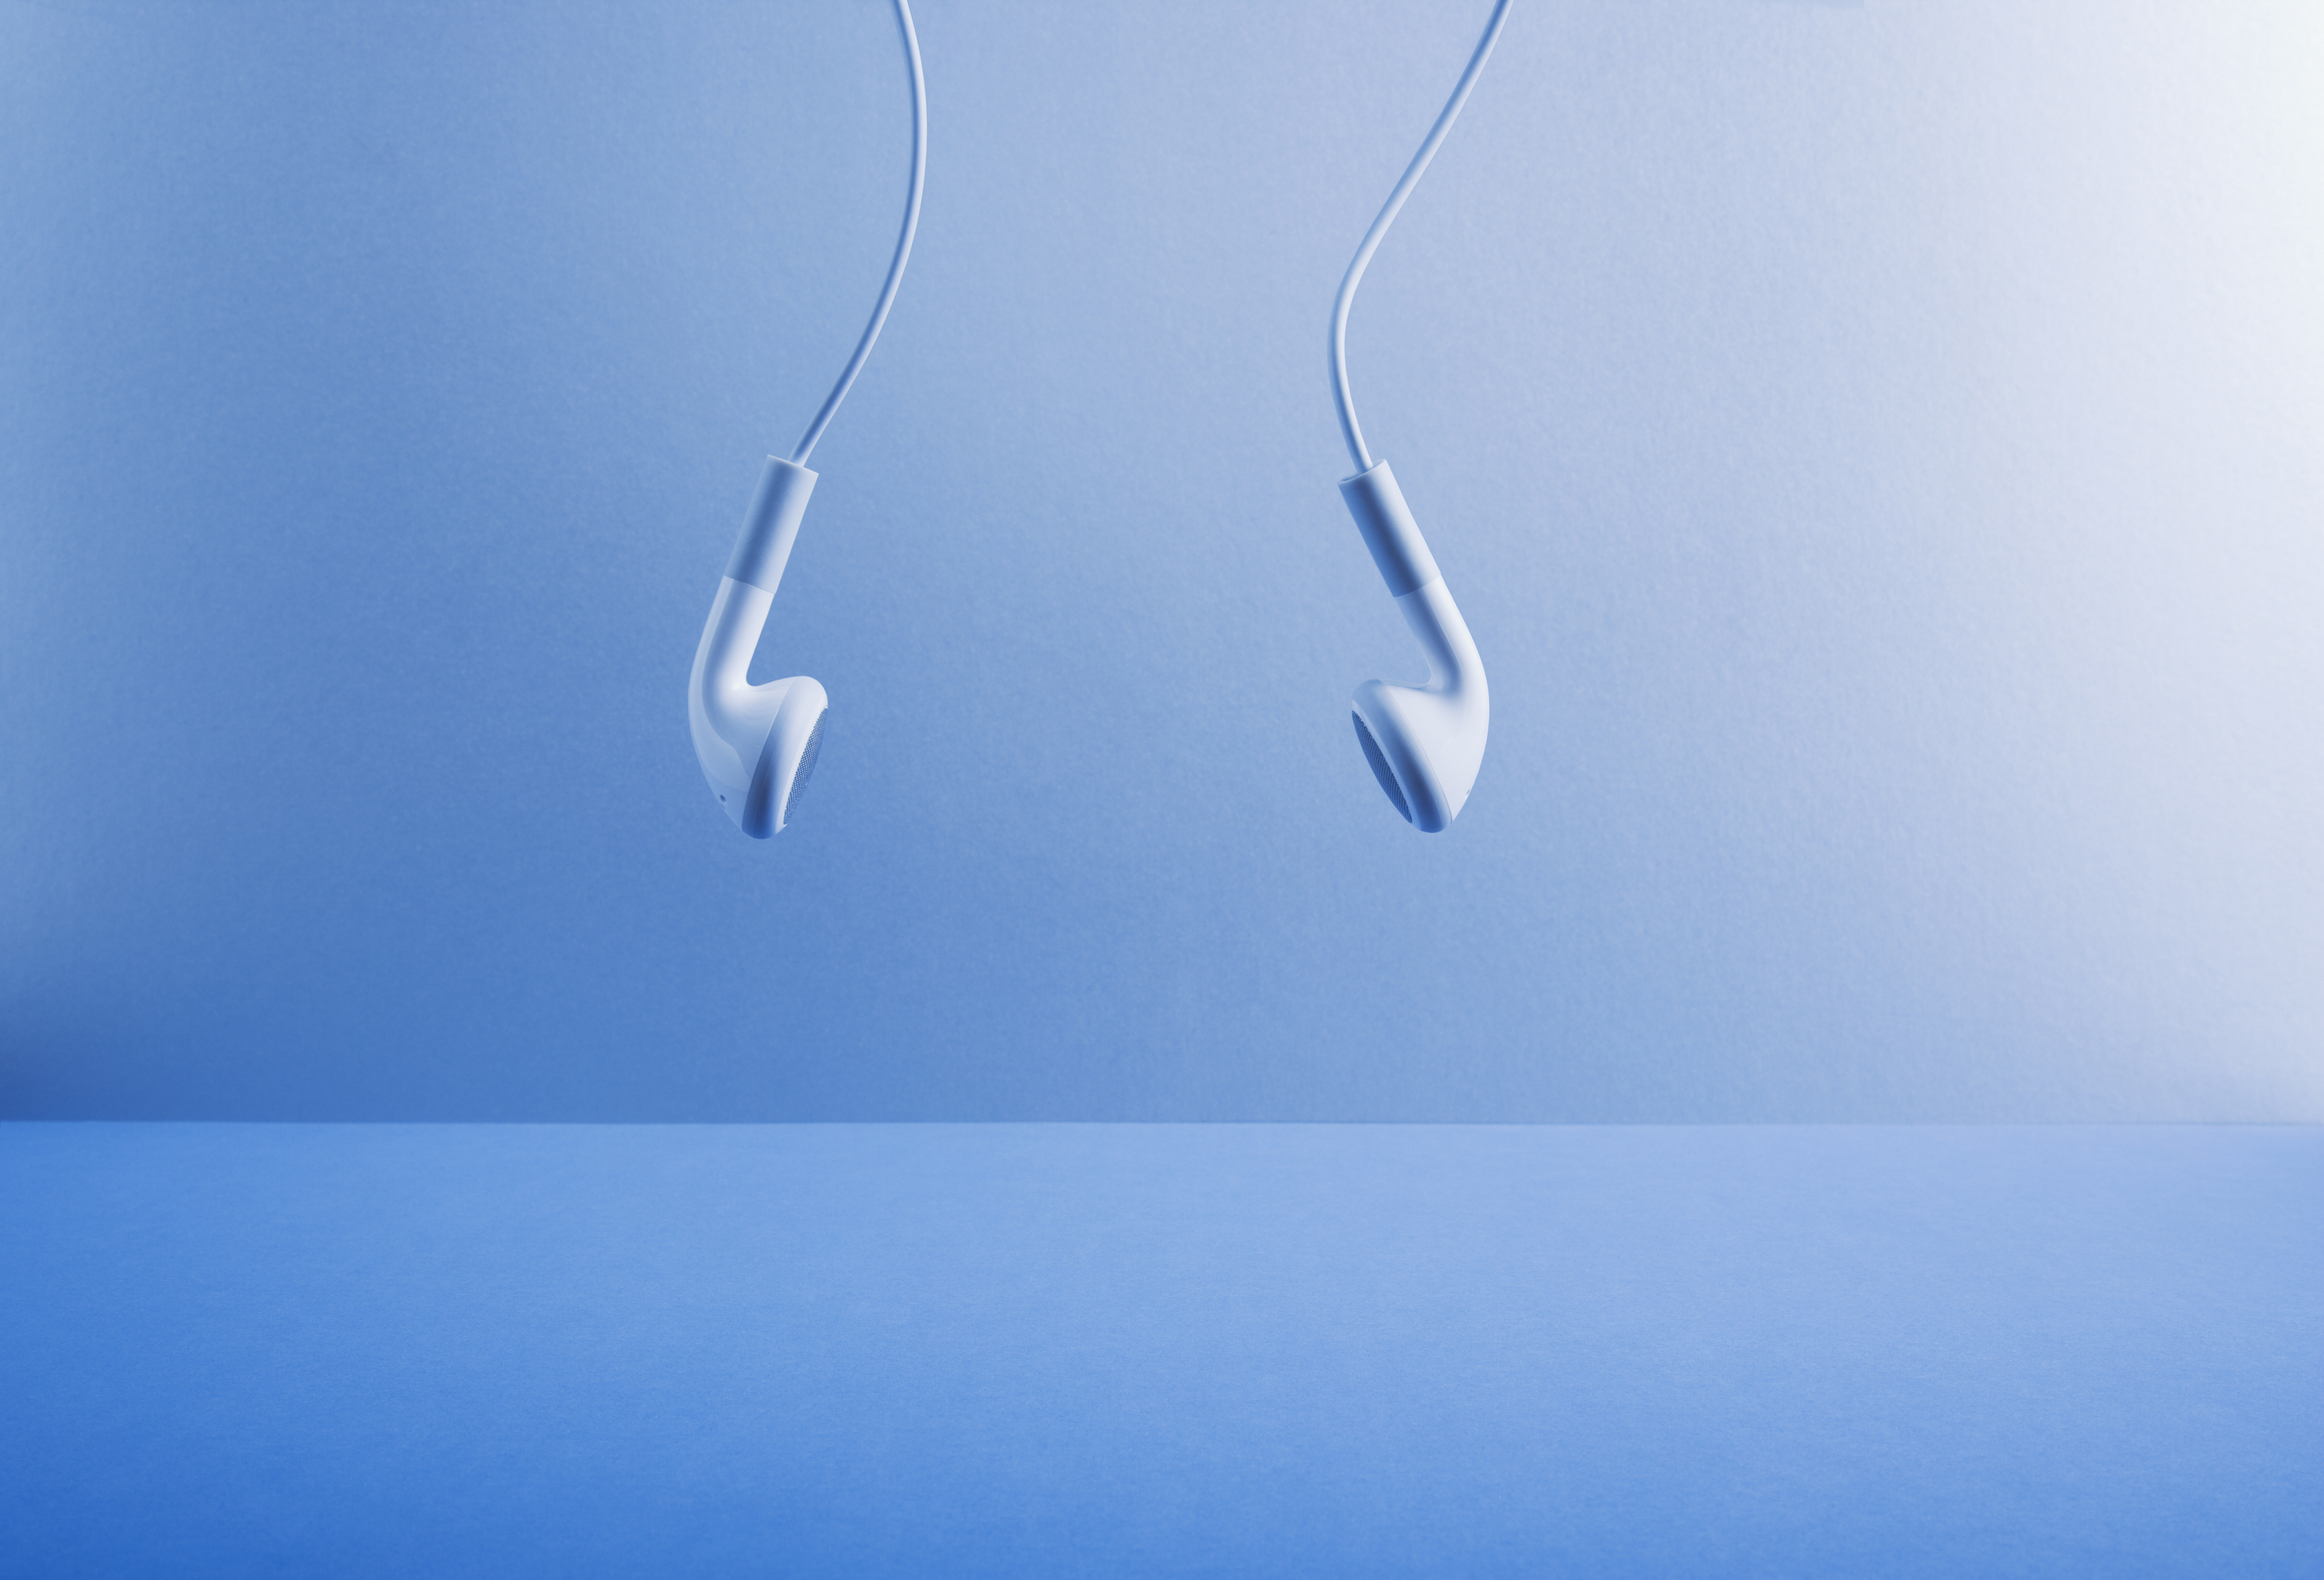 Picture of white headphones hanging on a blue background.